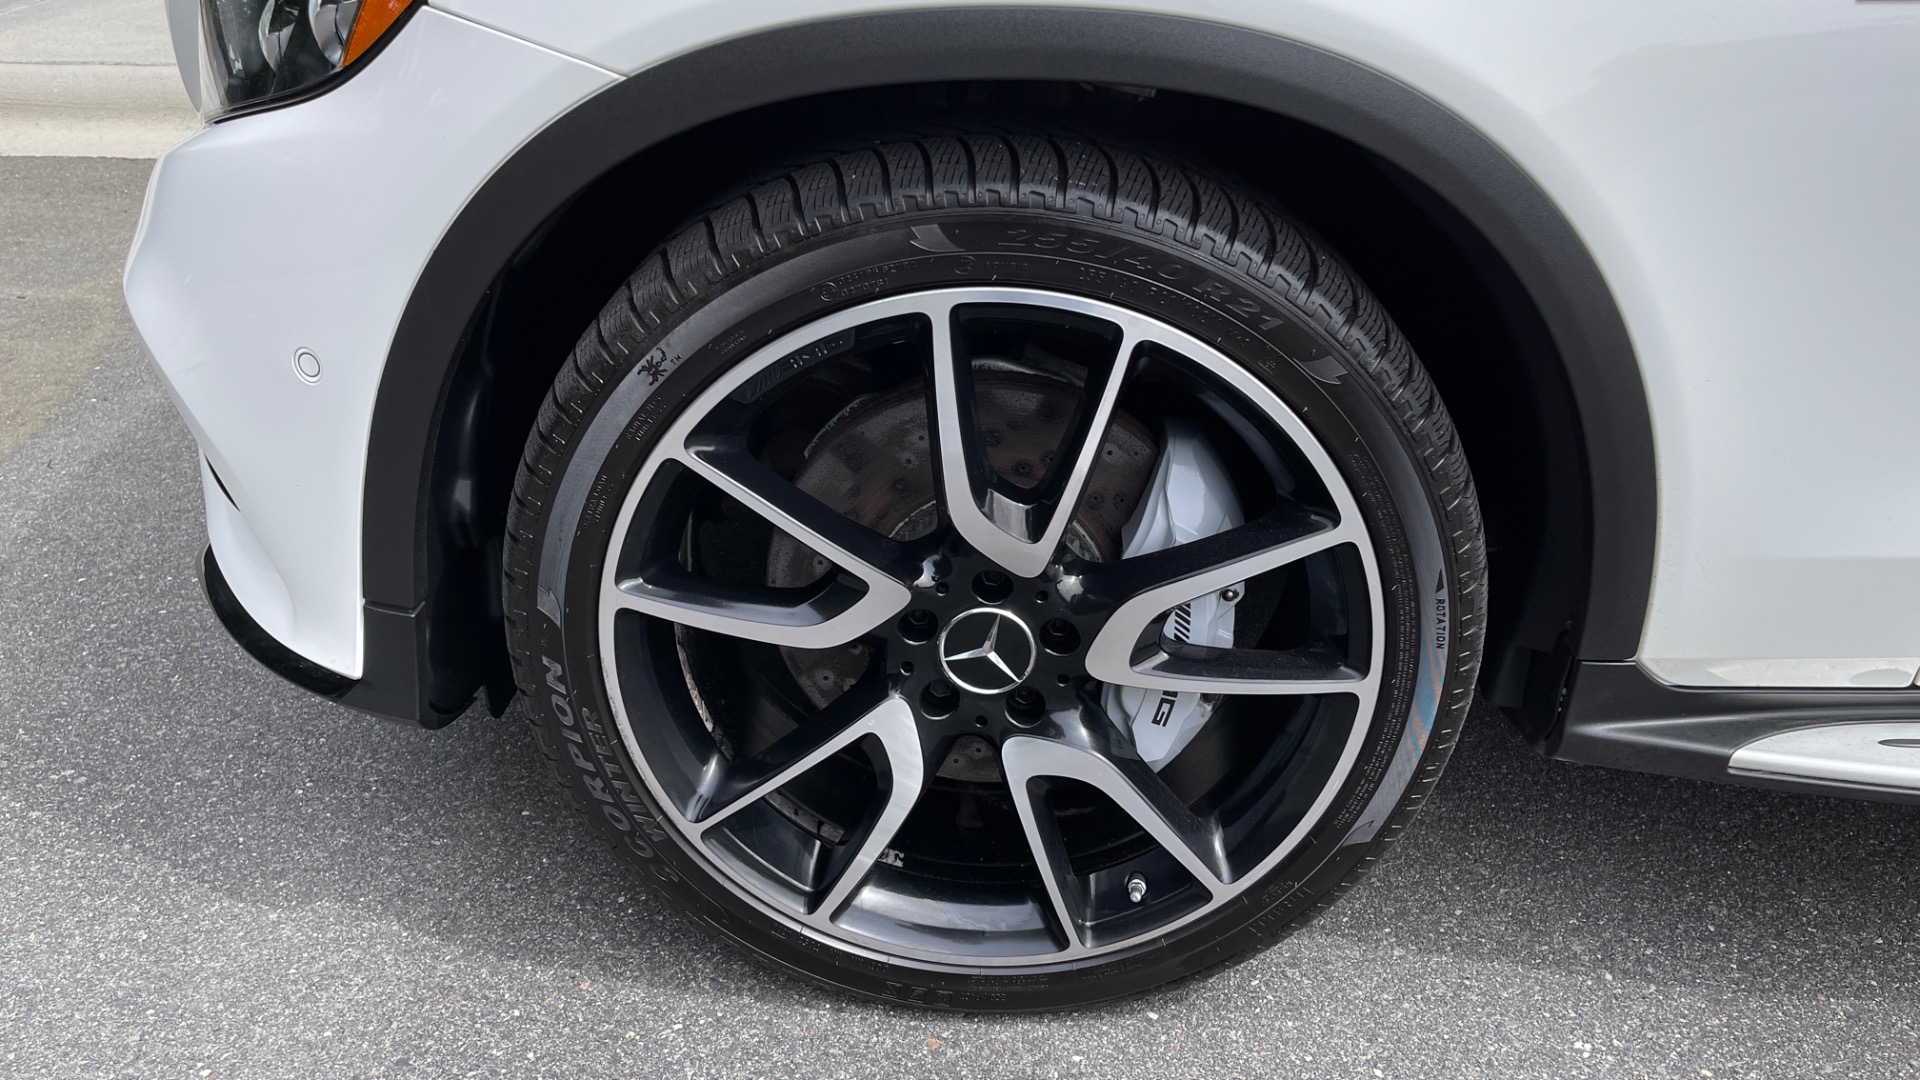 Used 2019 Mercedes-Benz GLC AMG GLC 43 / AMG BLACKOUT / 21IN WHEELS / AMG EXHAUST / EXTERIOR LIGHTING for sale $48,999 at Formula Imports in Charlotte NC 28227 41